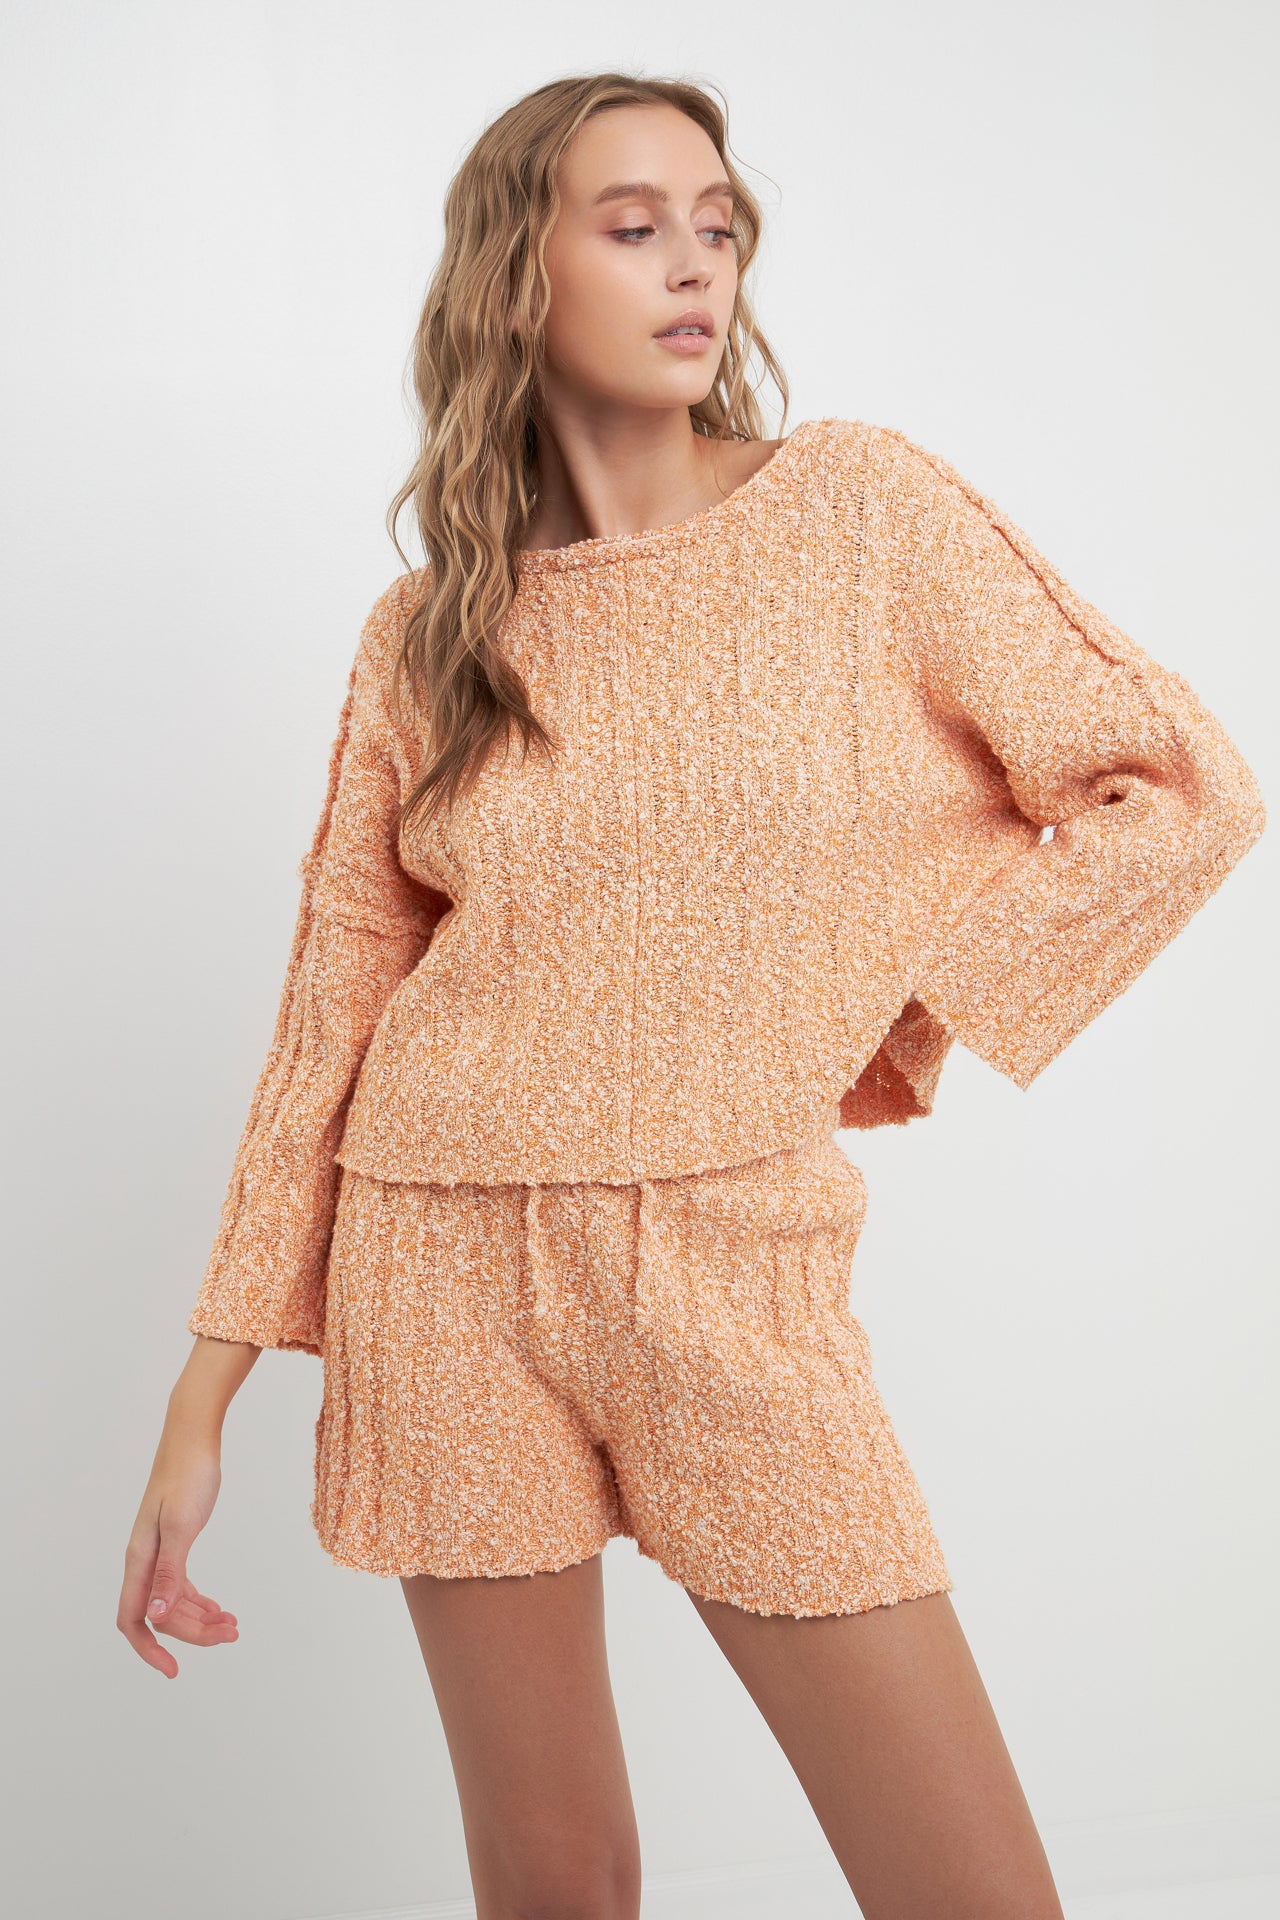 FREE THE ROSES - Cozy Sweater Shorts - SWEATERS & KNITS available at Objectrare